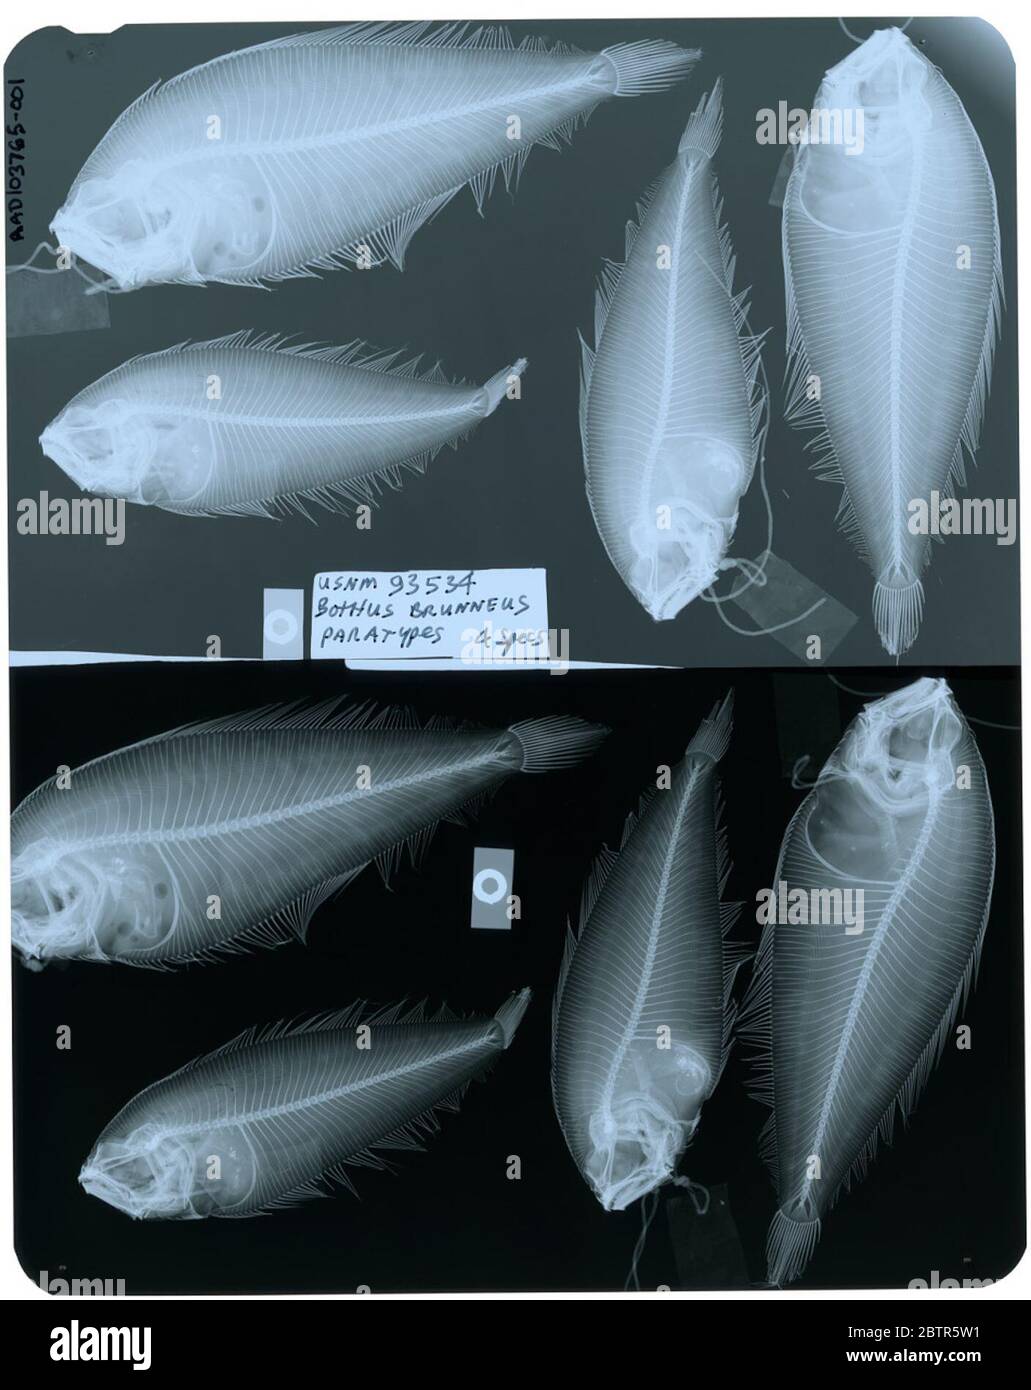 Bothus brunneus. Radiograph is of a paratype; The Smithsonian NMNH Division of Fishes uses the convention of maintaining the original species name for type specimens designated at the time of description. The currently accepted name for this species is Arnoglossus brunneus.29 Oct 2018D. 51211 Stock Photo